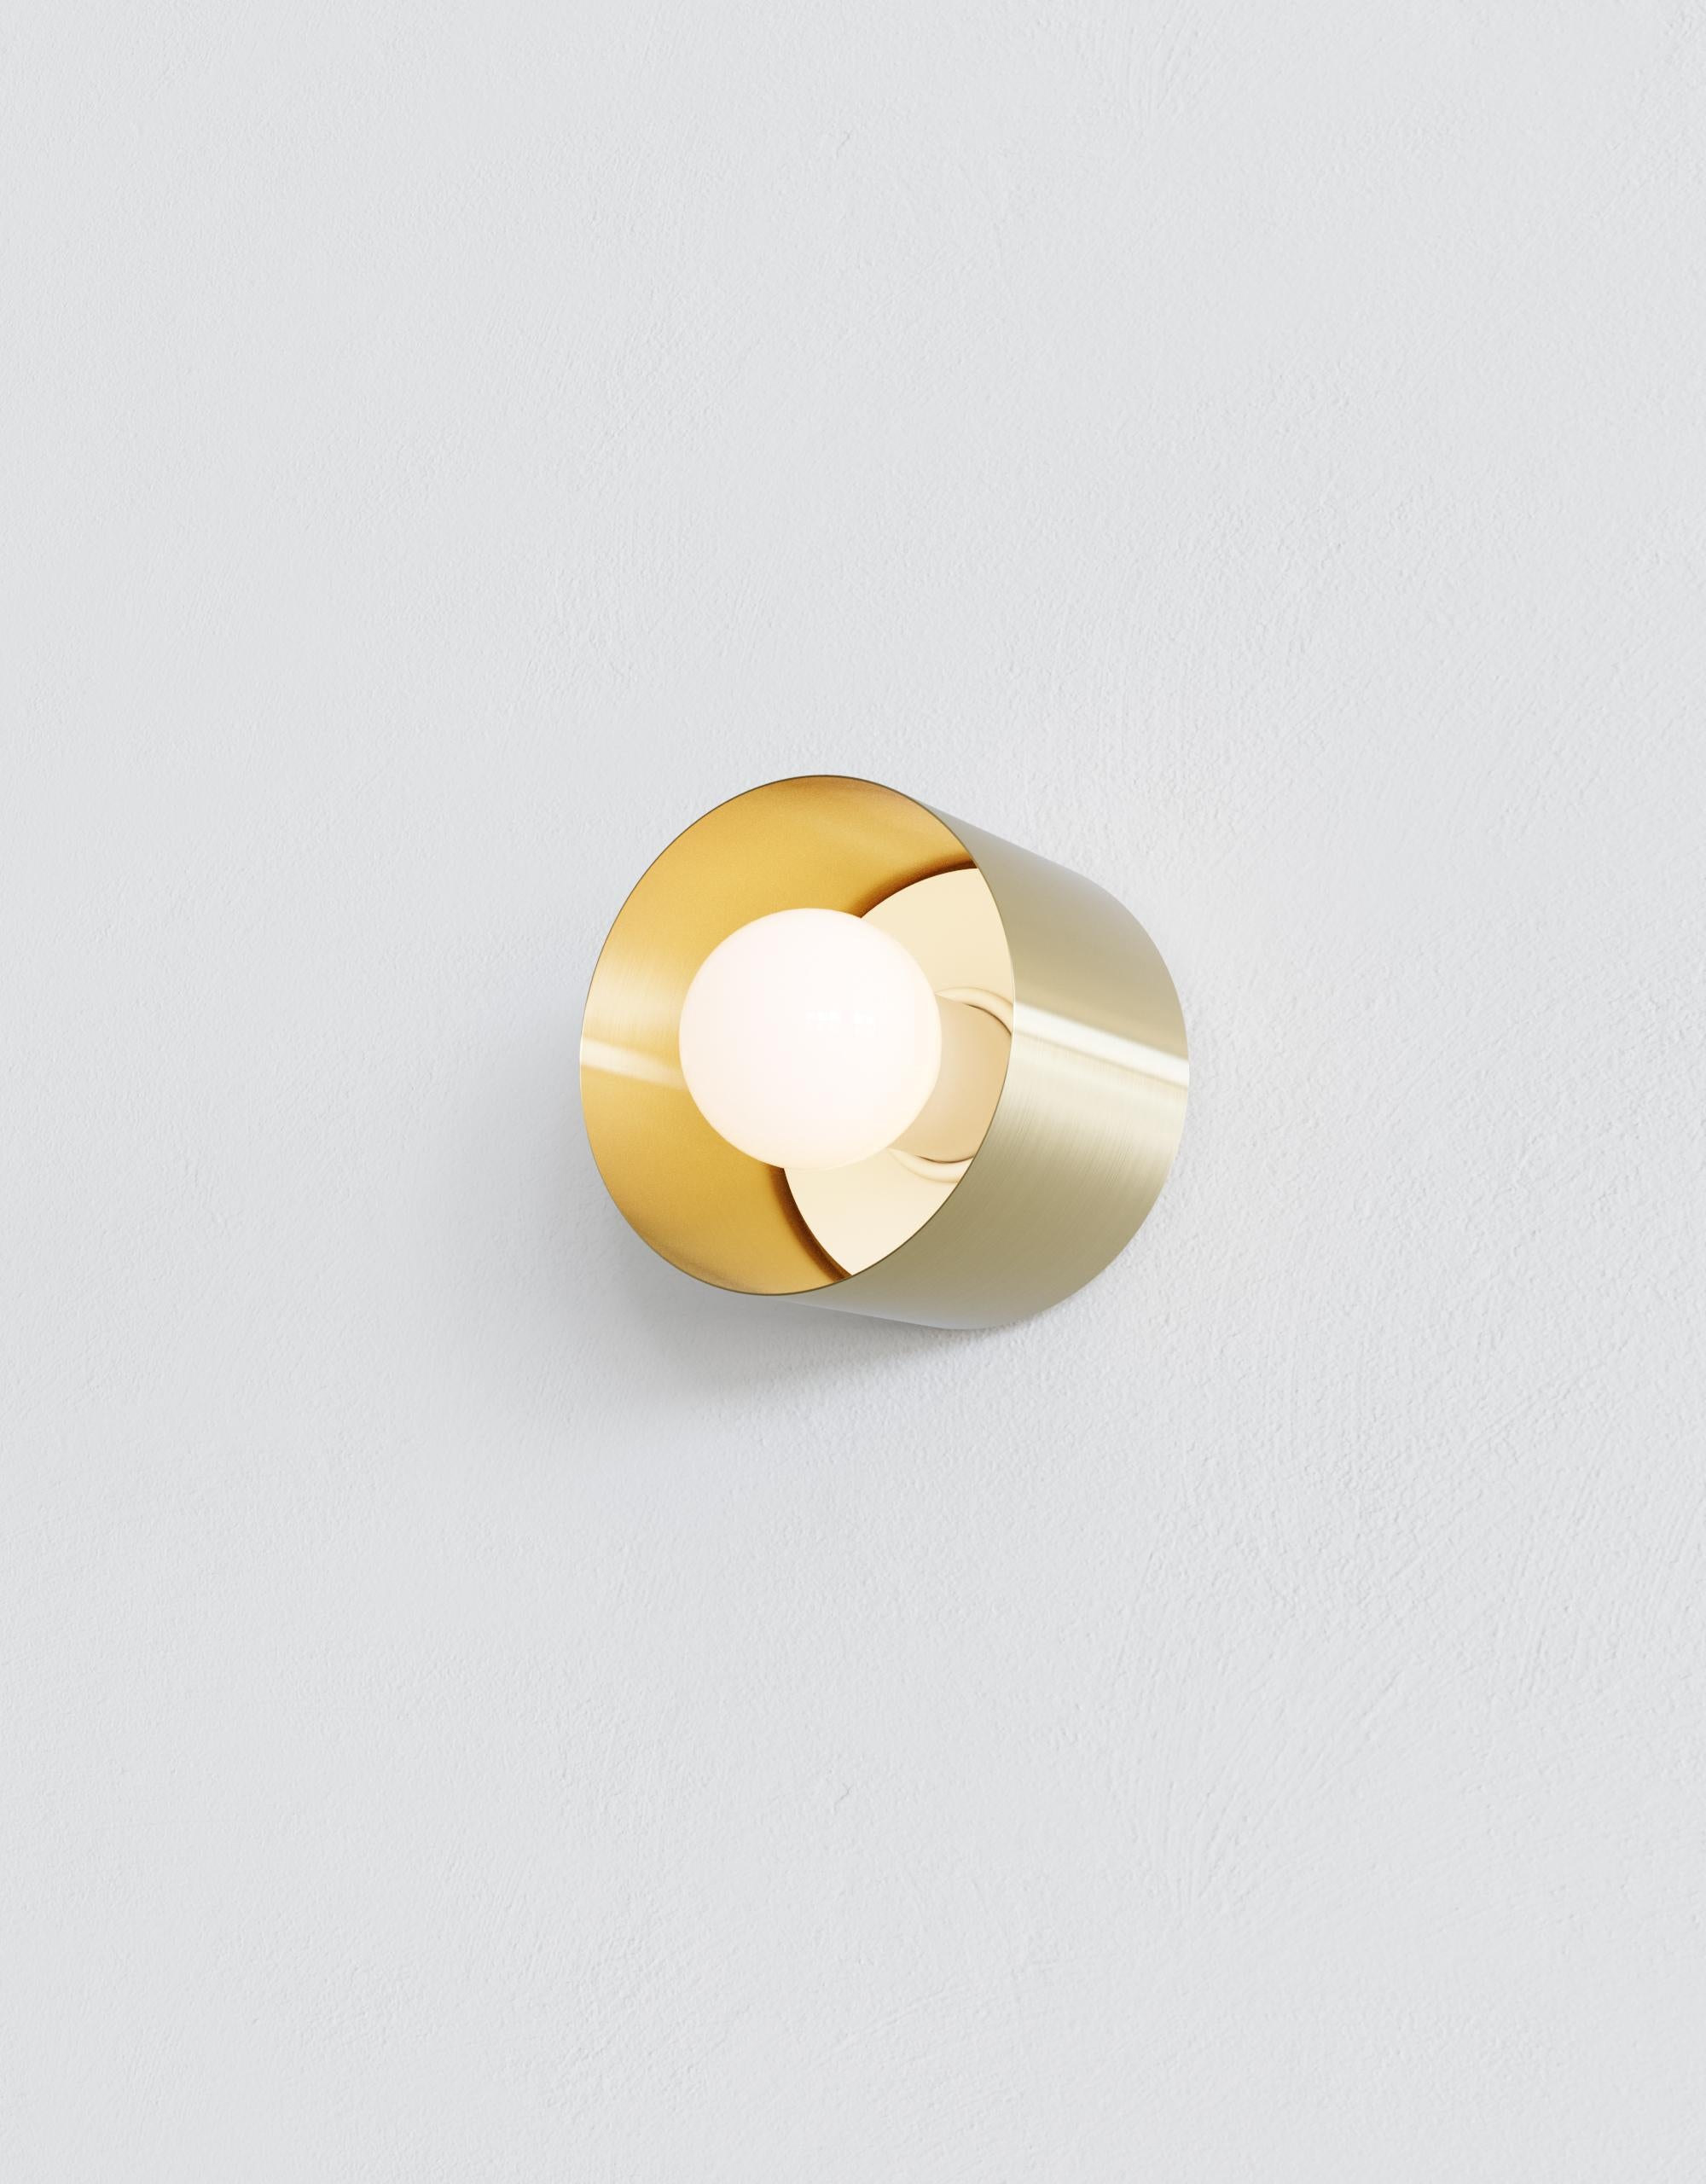 As if designing jewelry, Spun was created considered how each lighting component could complement the other to create tidy elegant compositions. Spun features a polished brass, matte black, or frosted glass shade, which encases an exposed globe